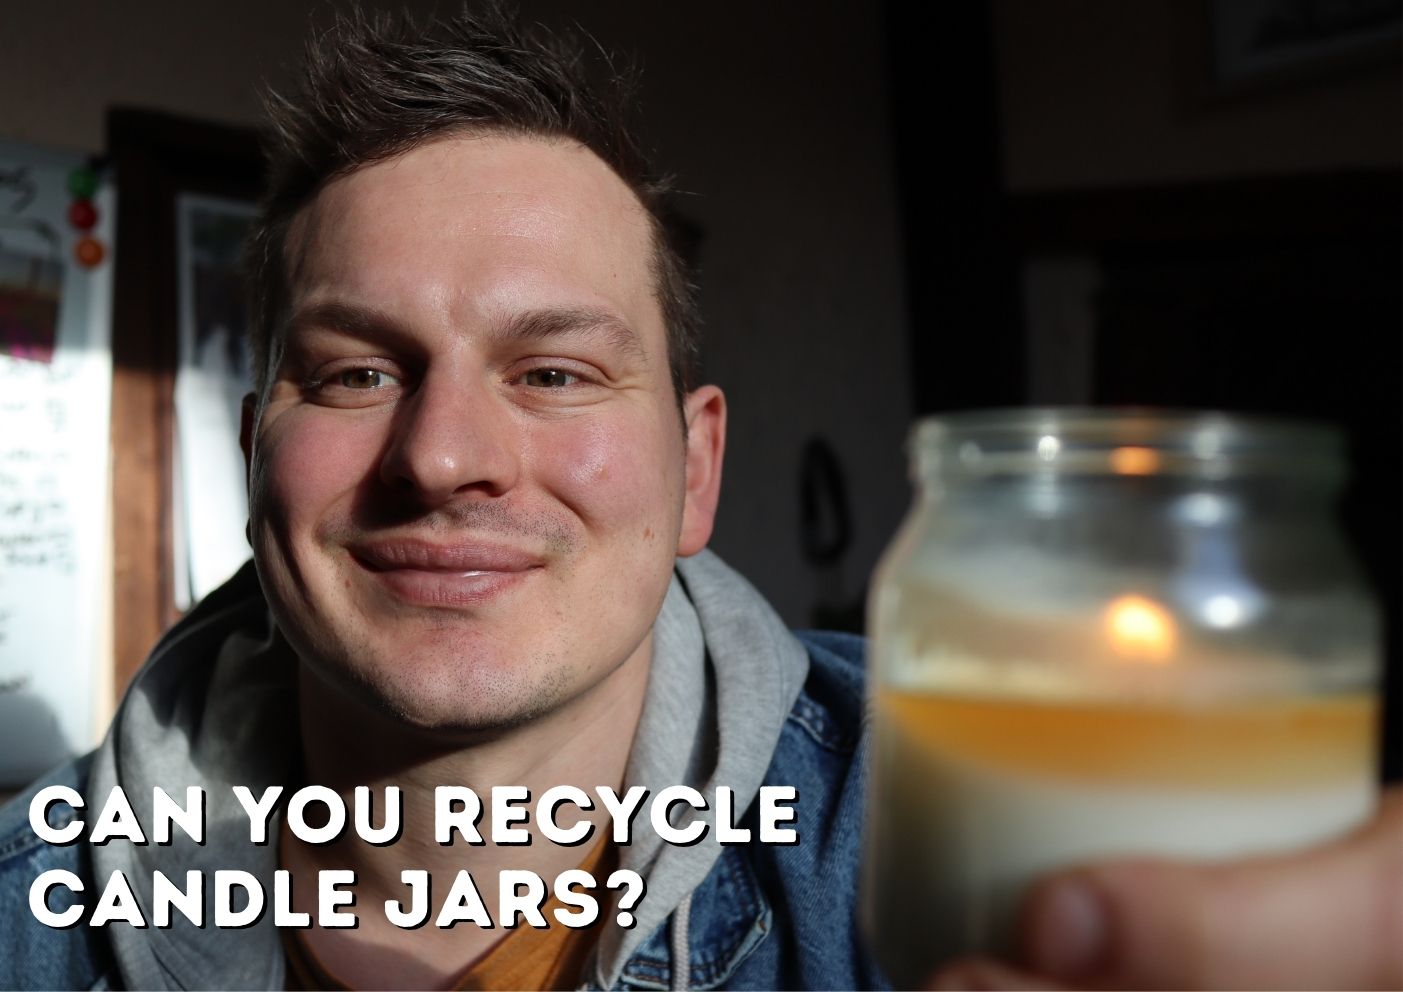 Can you recycle candle jars?